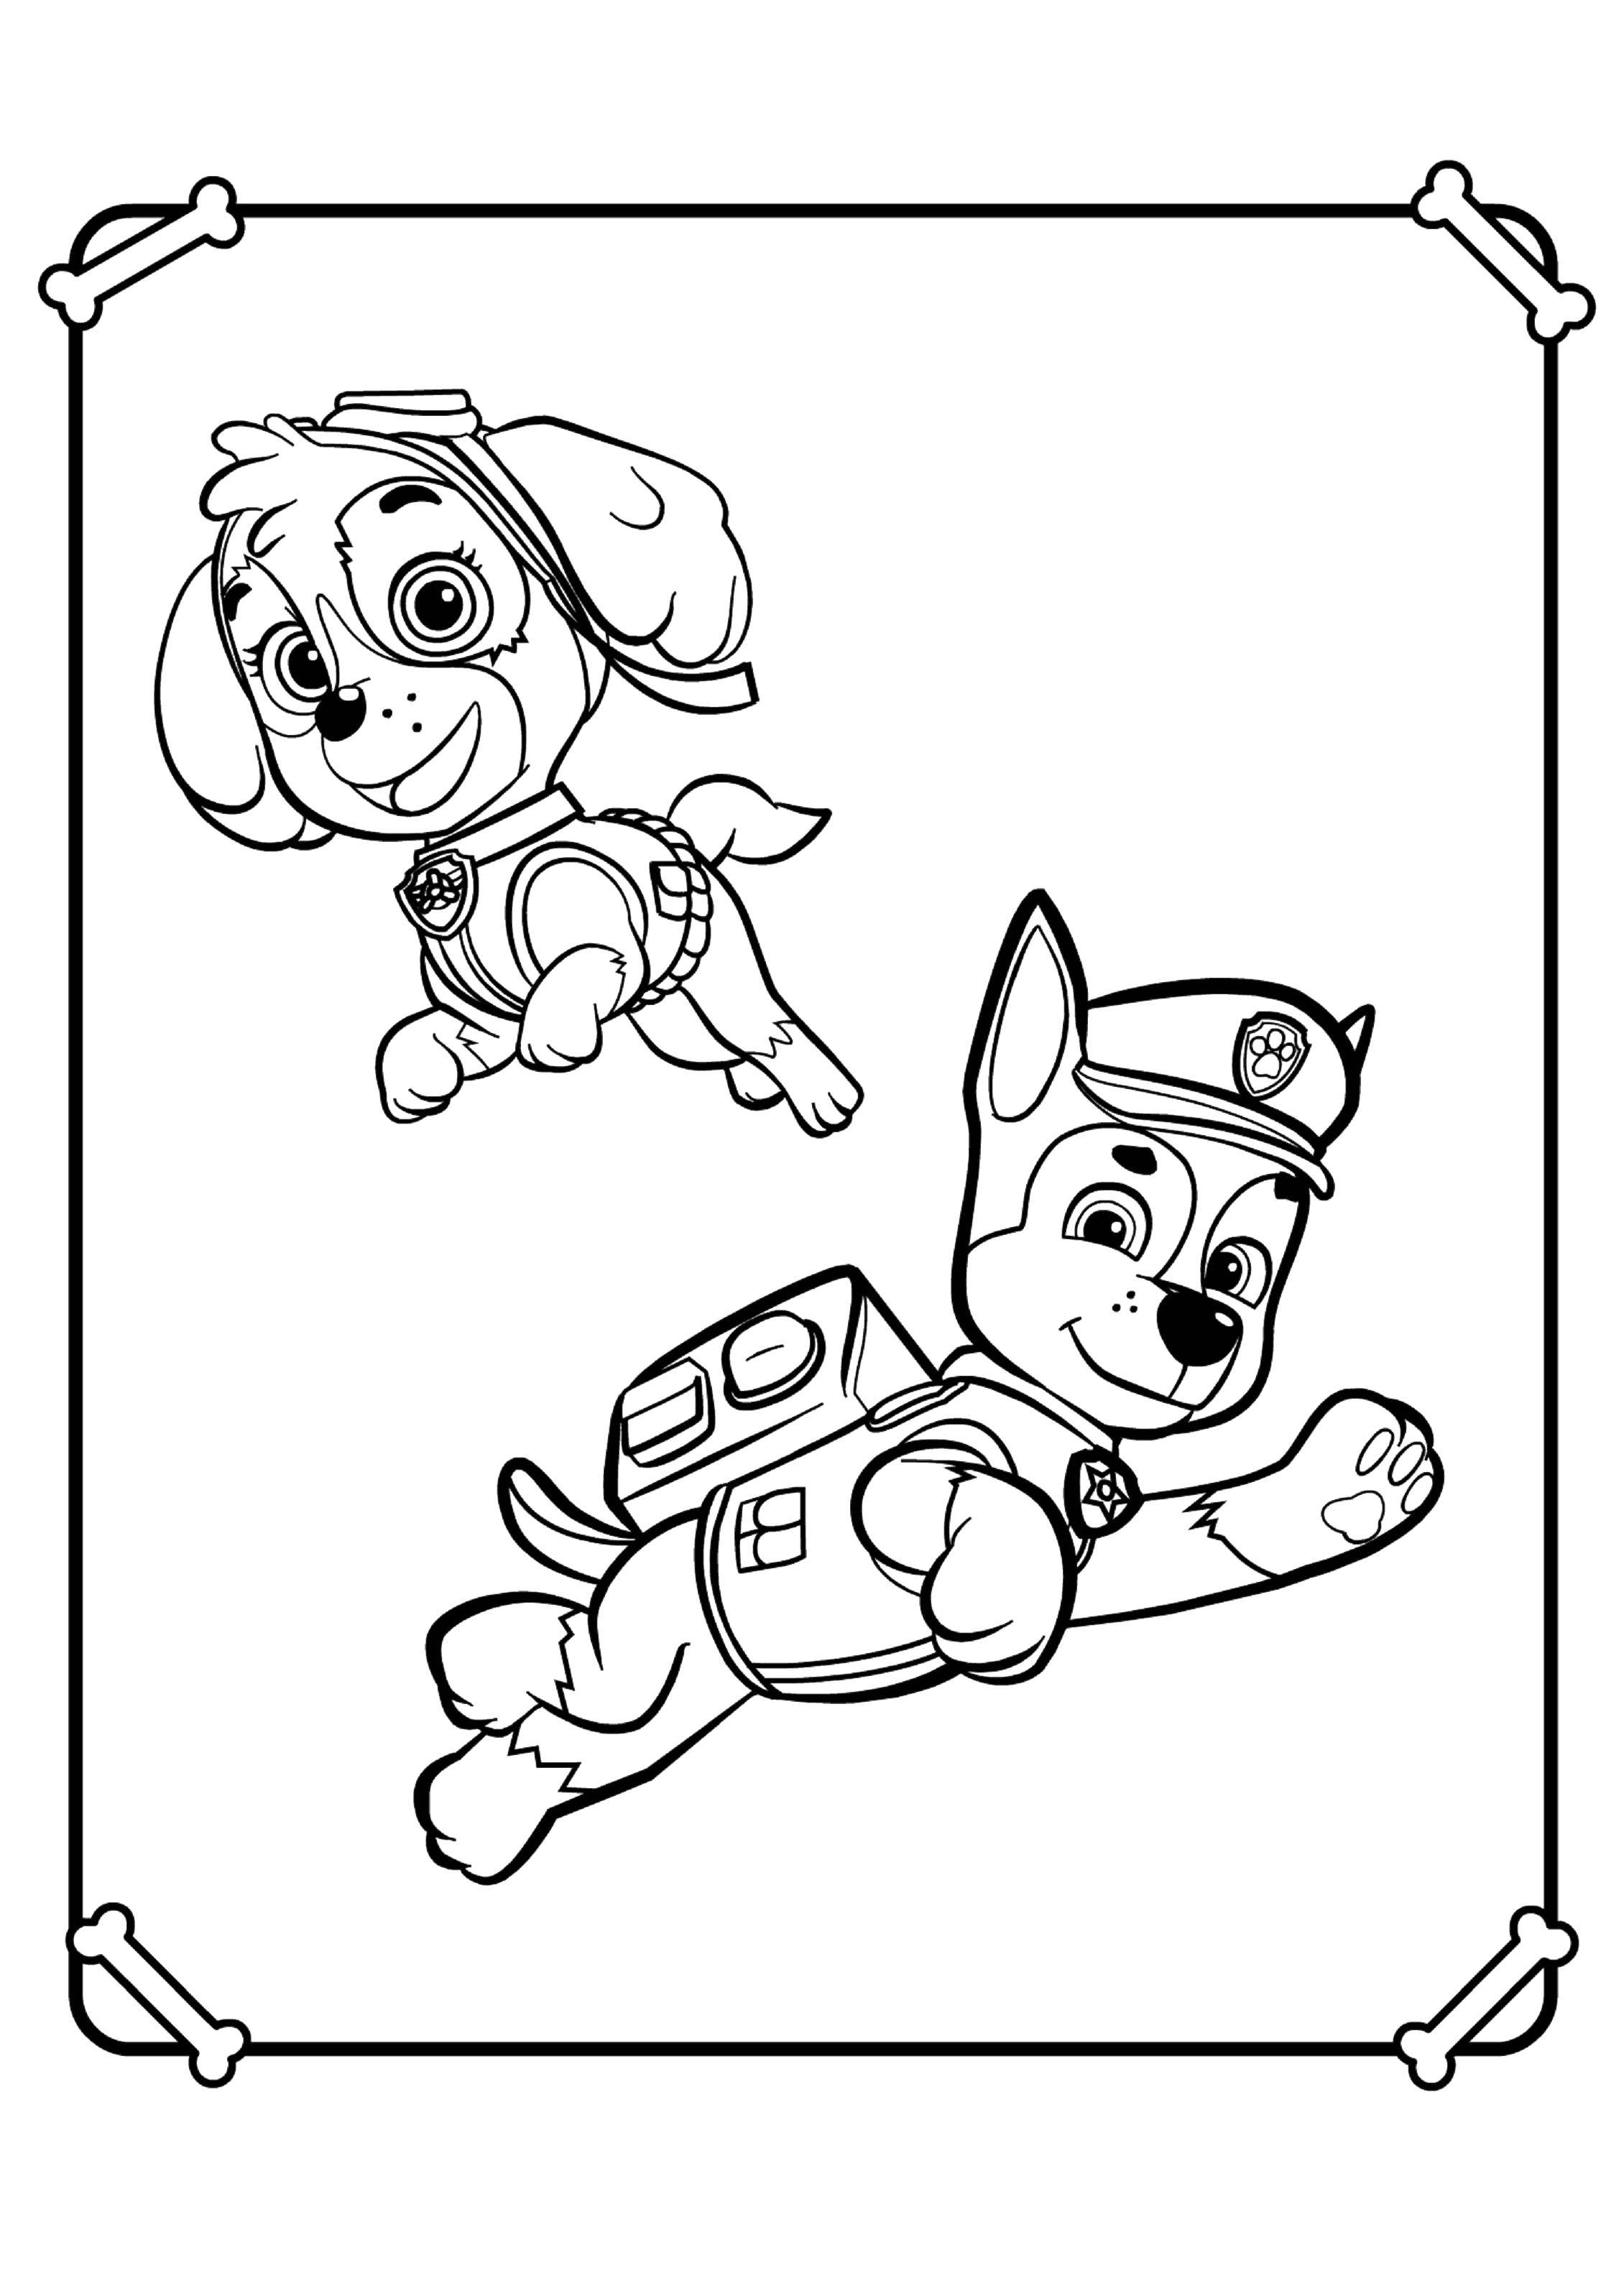 Coloring Chase and Skye. Category paw patrol. Tags:  Paw patrol.